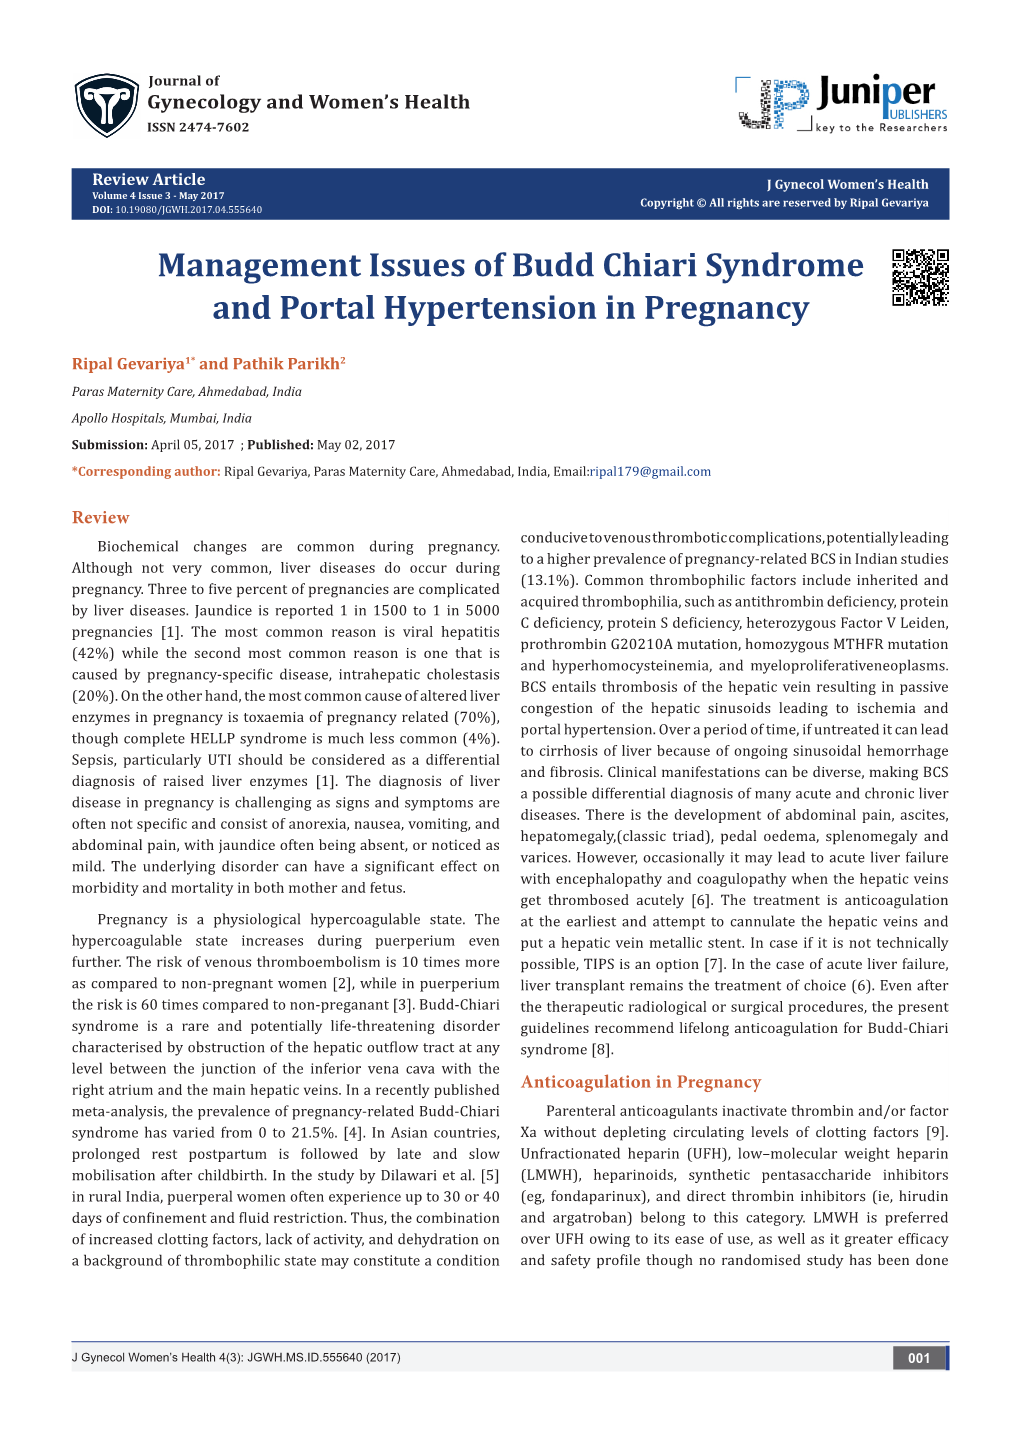 Management Issues of Budd Chiari Syndrome and Portal Hypertension in Pregnancy